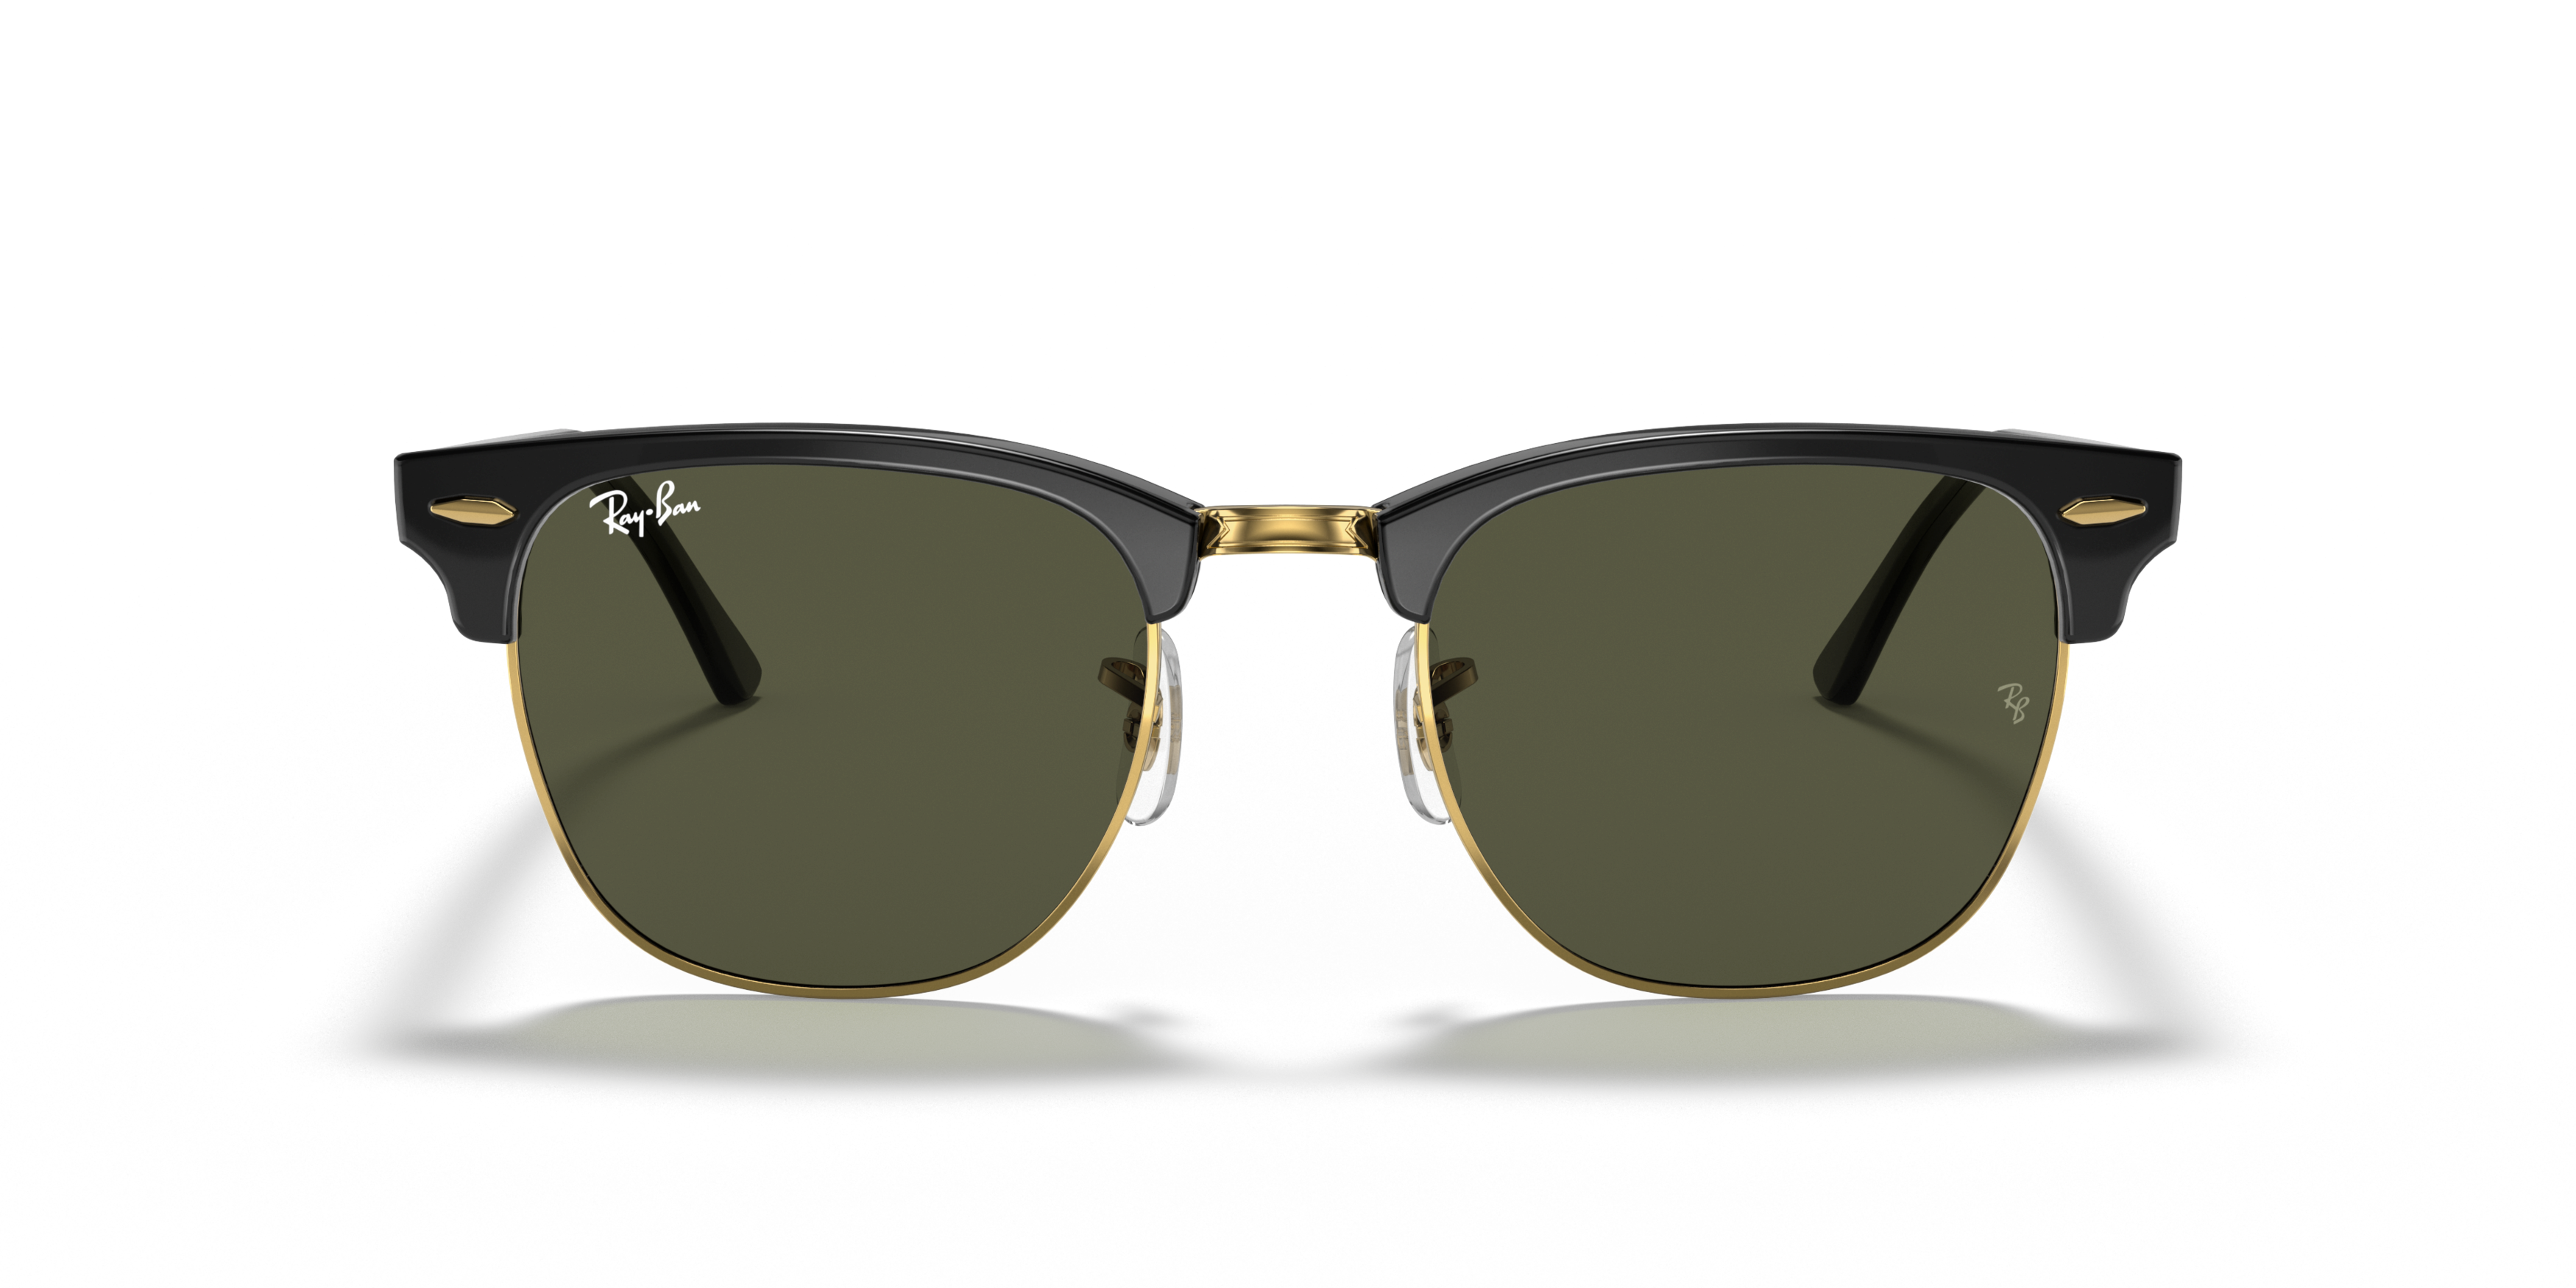 [products.image.front] Ray-Ban Clubmaster RB3016 W0365